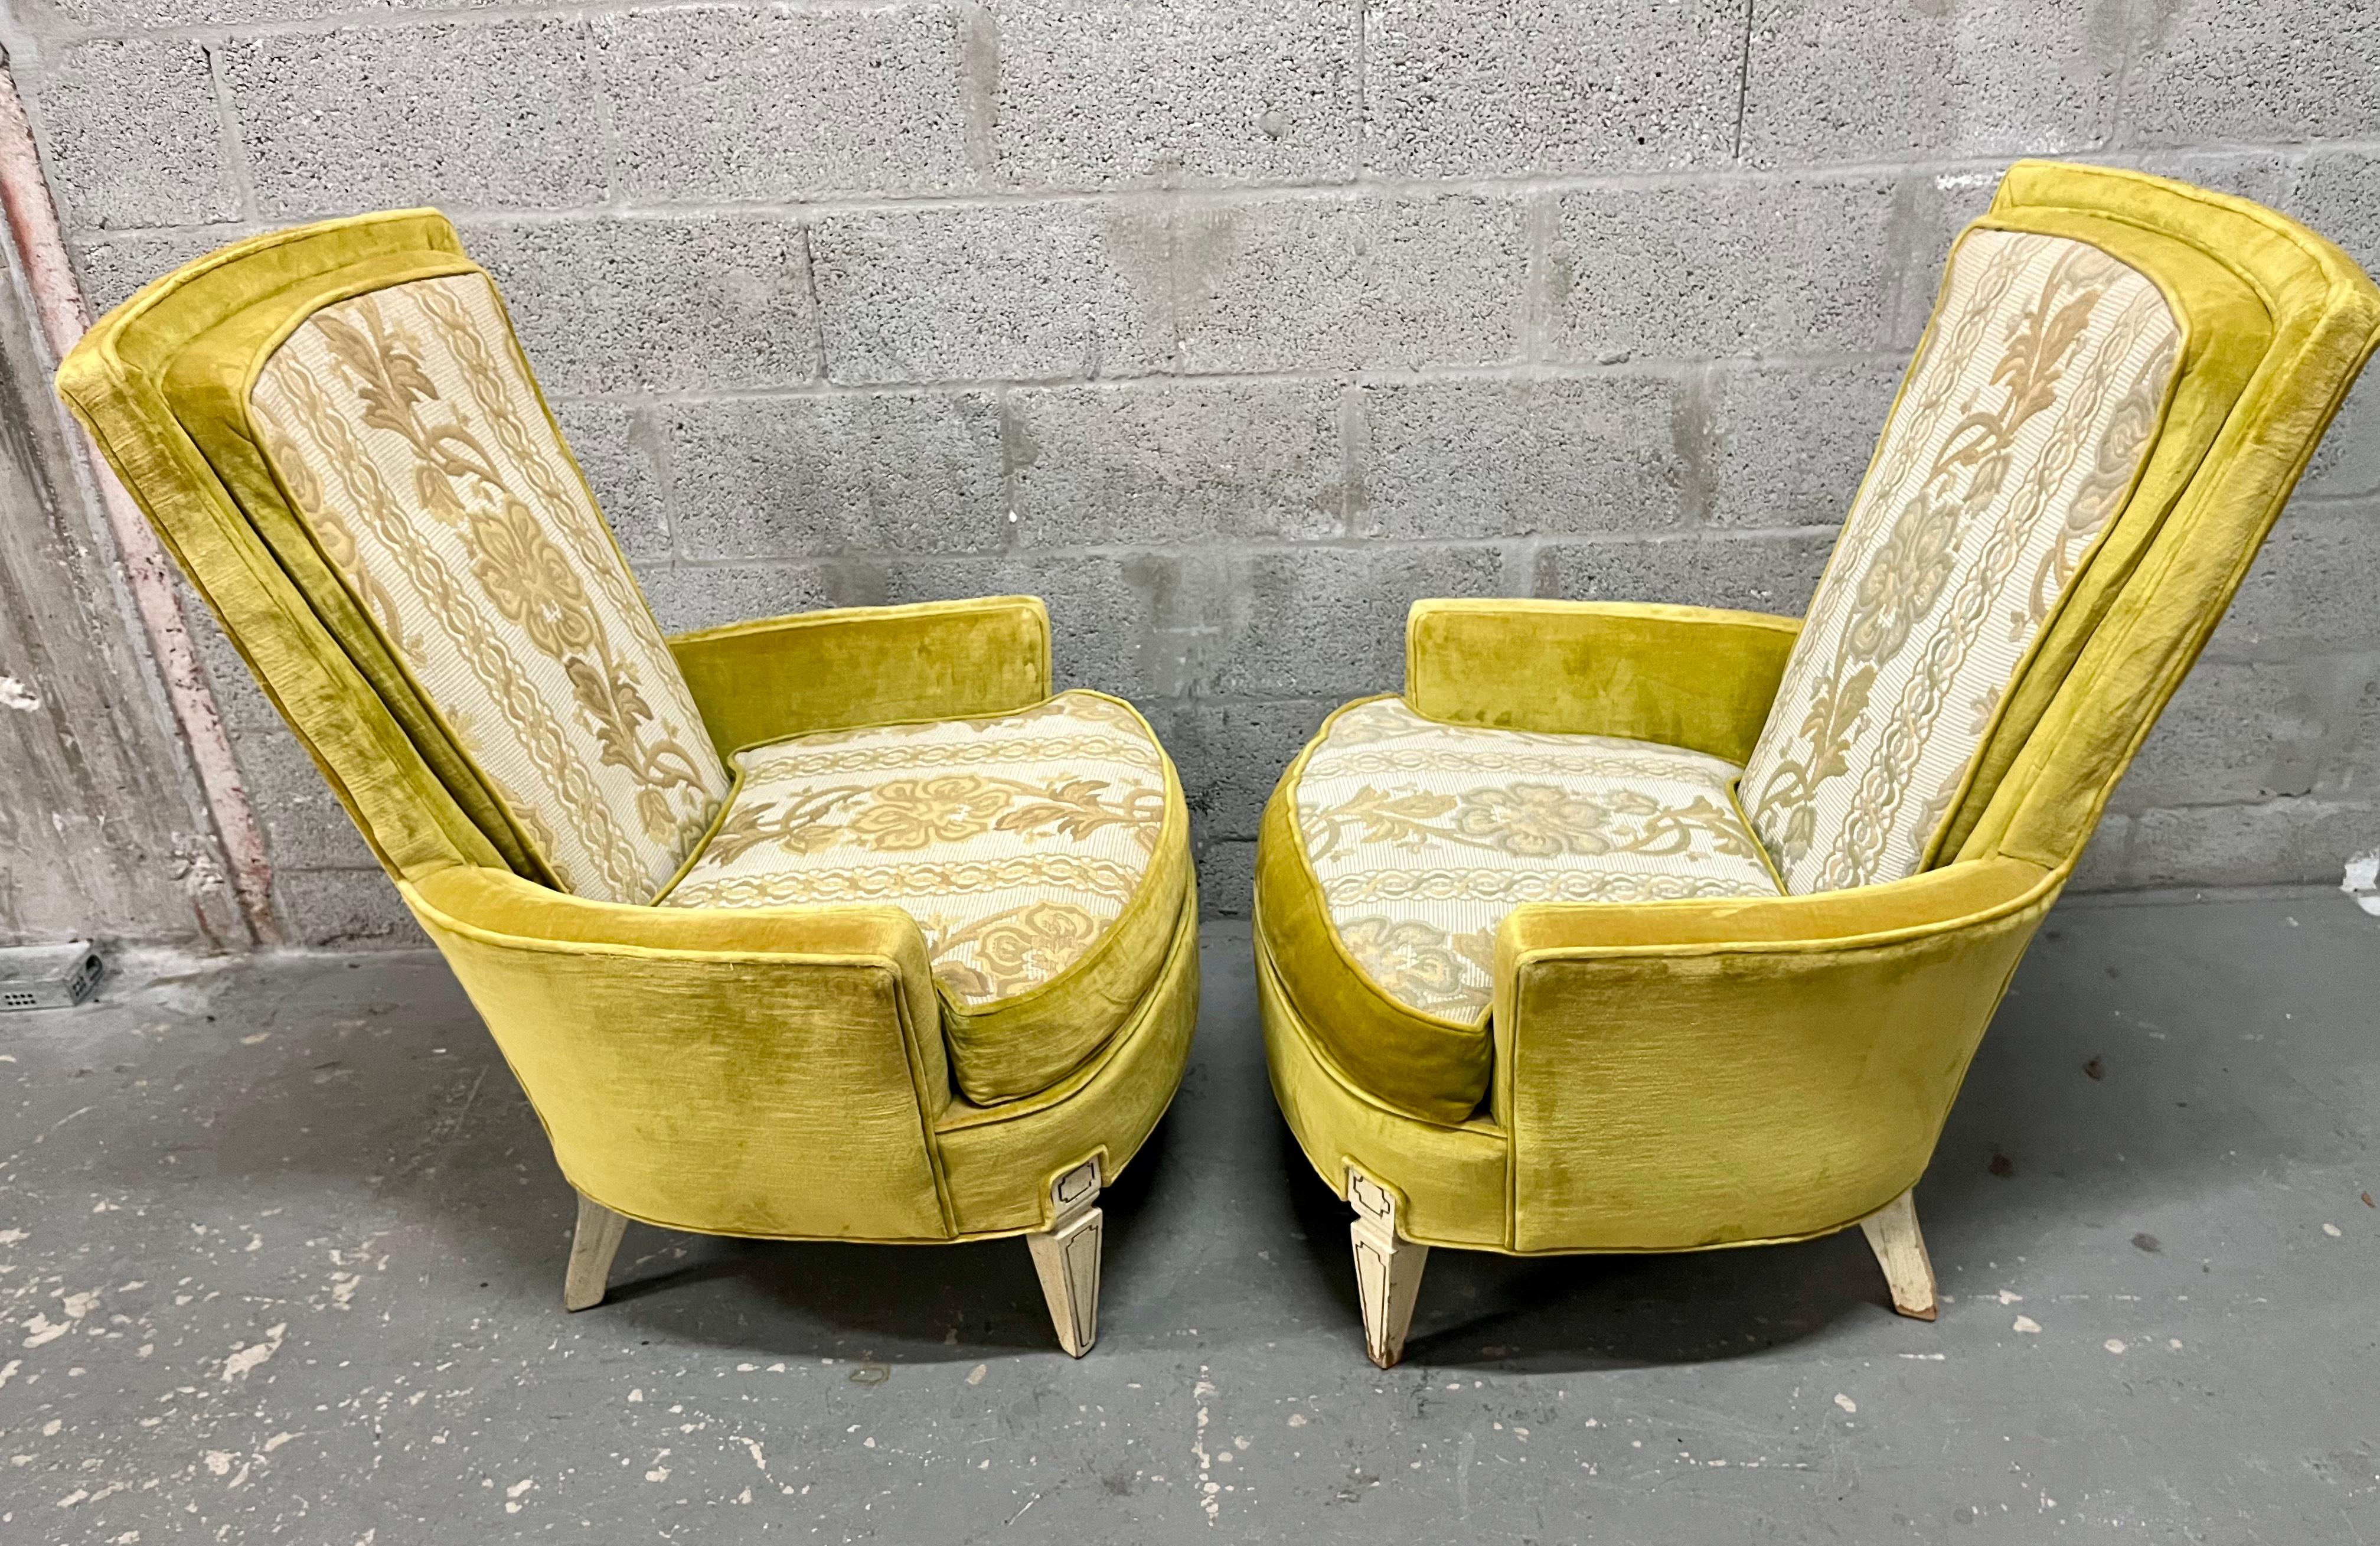 A Pair of Hollywood Regency Upholstered Lounge Chairs by Silver Craft. C. 1960s For Sale 1